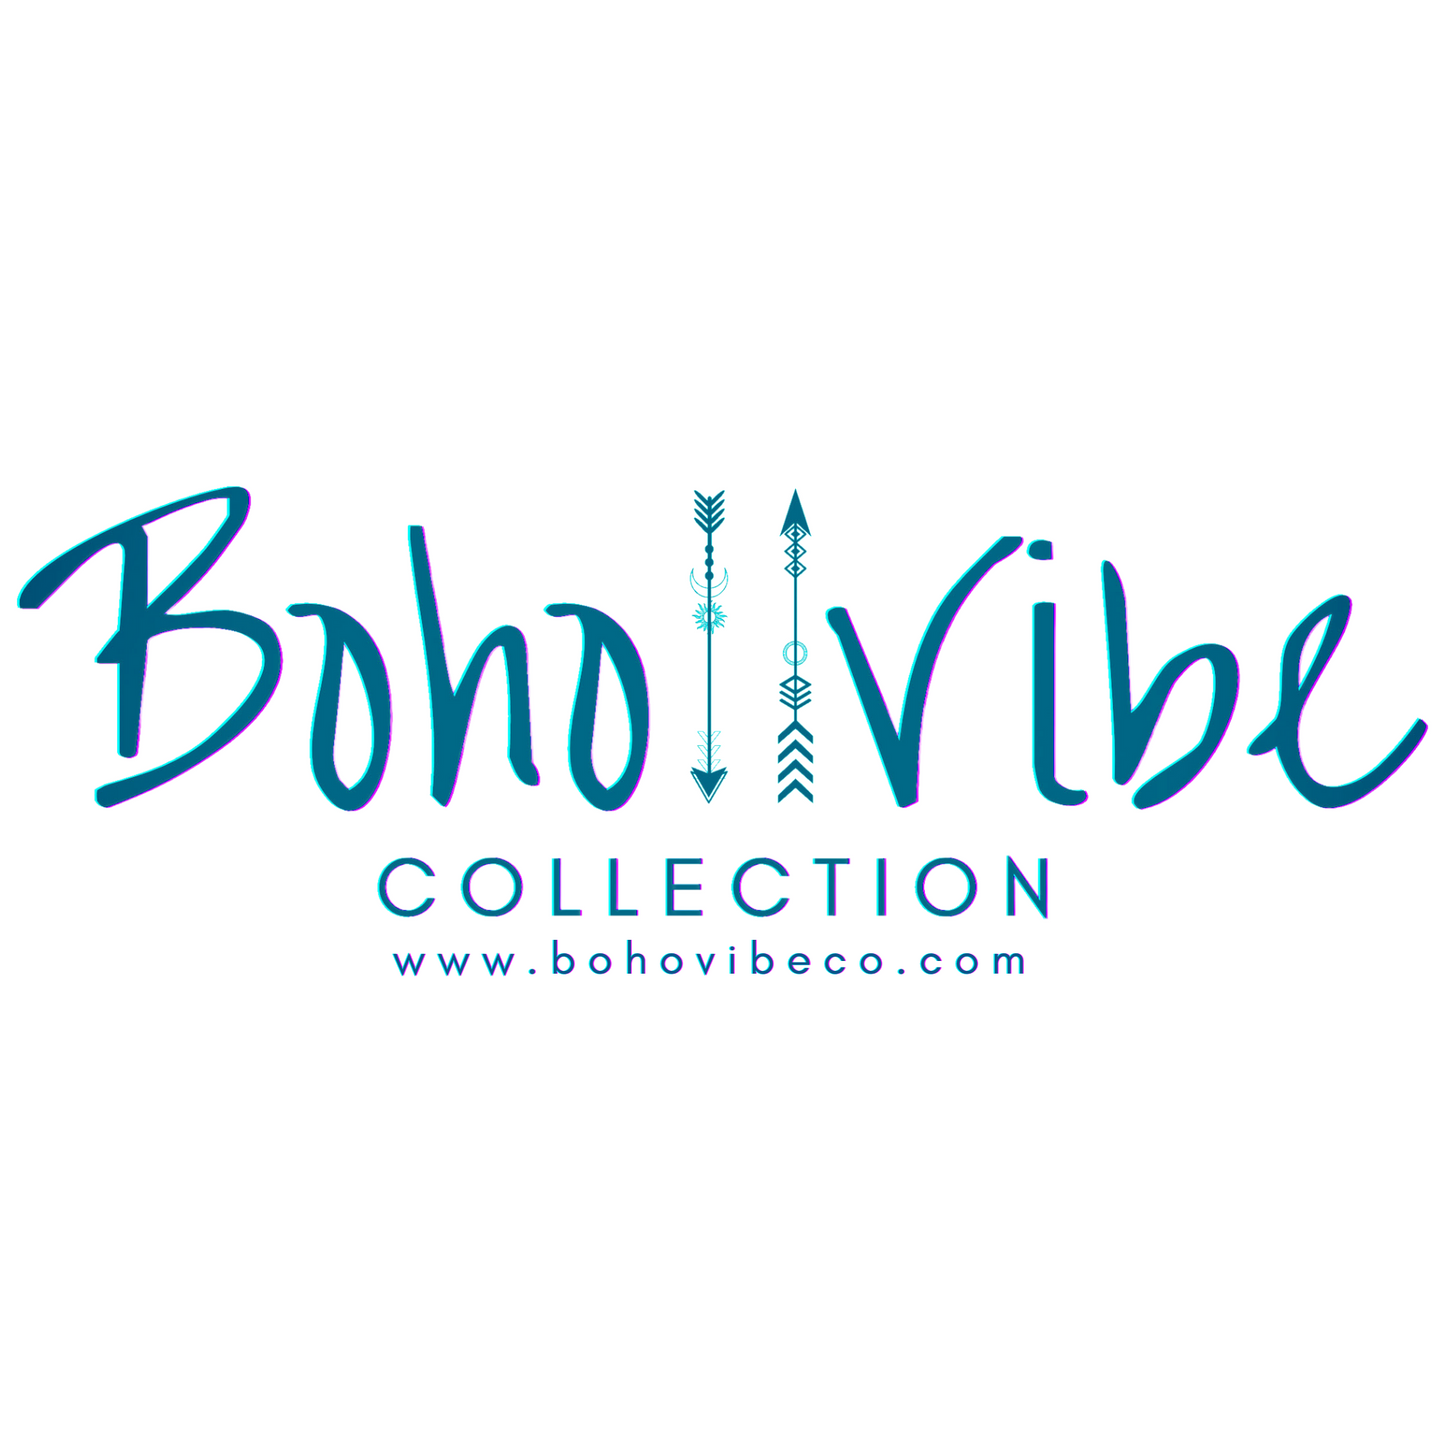 Boho ↡↟ Vibe Collection ↠ Water Fountain Outdoor Solar Power Water Feature Charcoal Colour 4 Bowls and LED Lights 